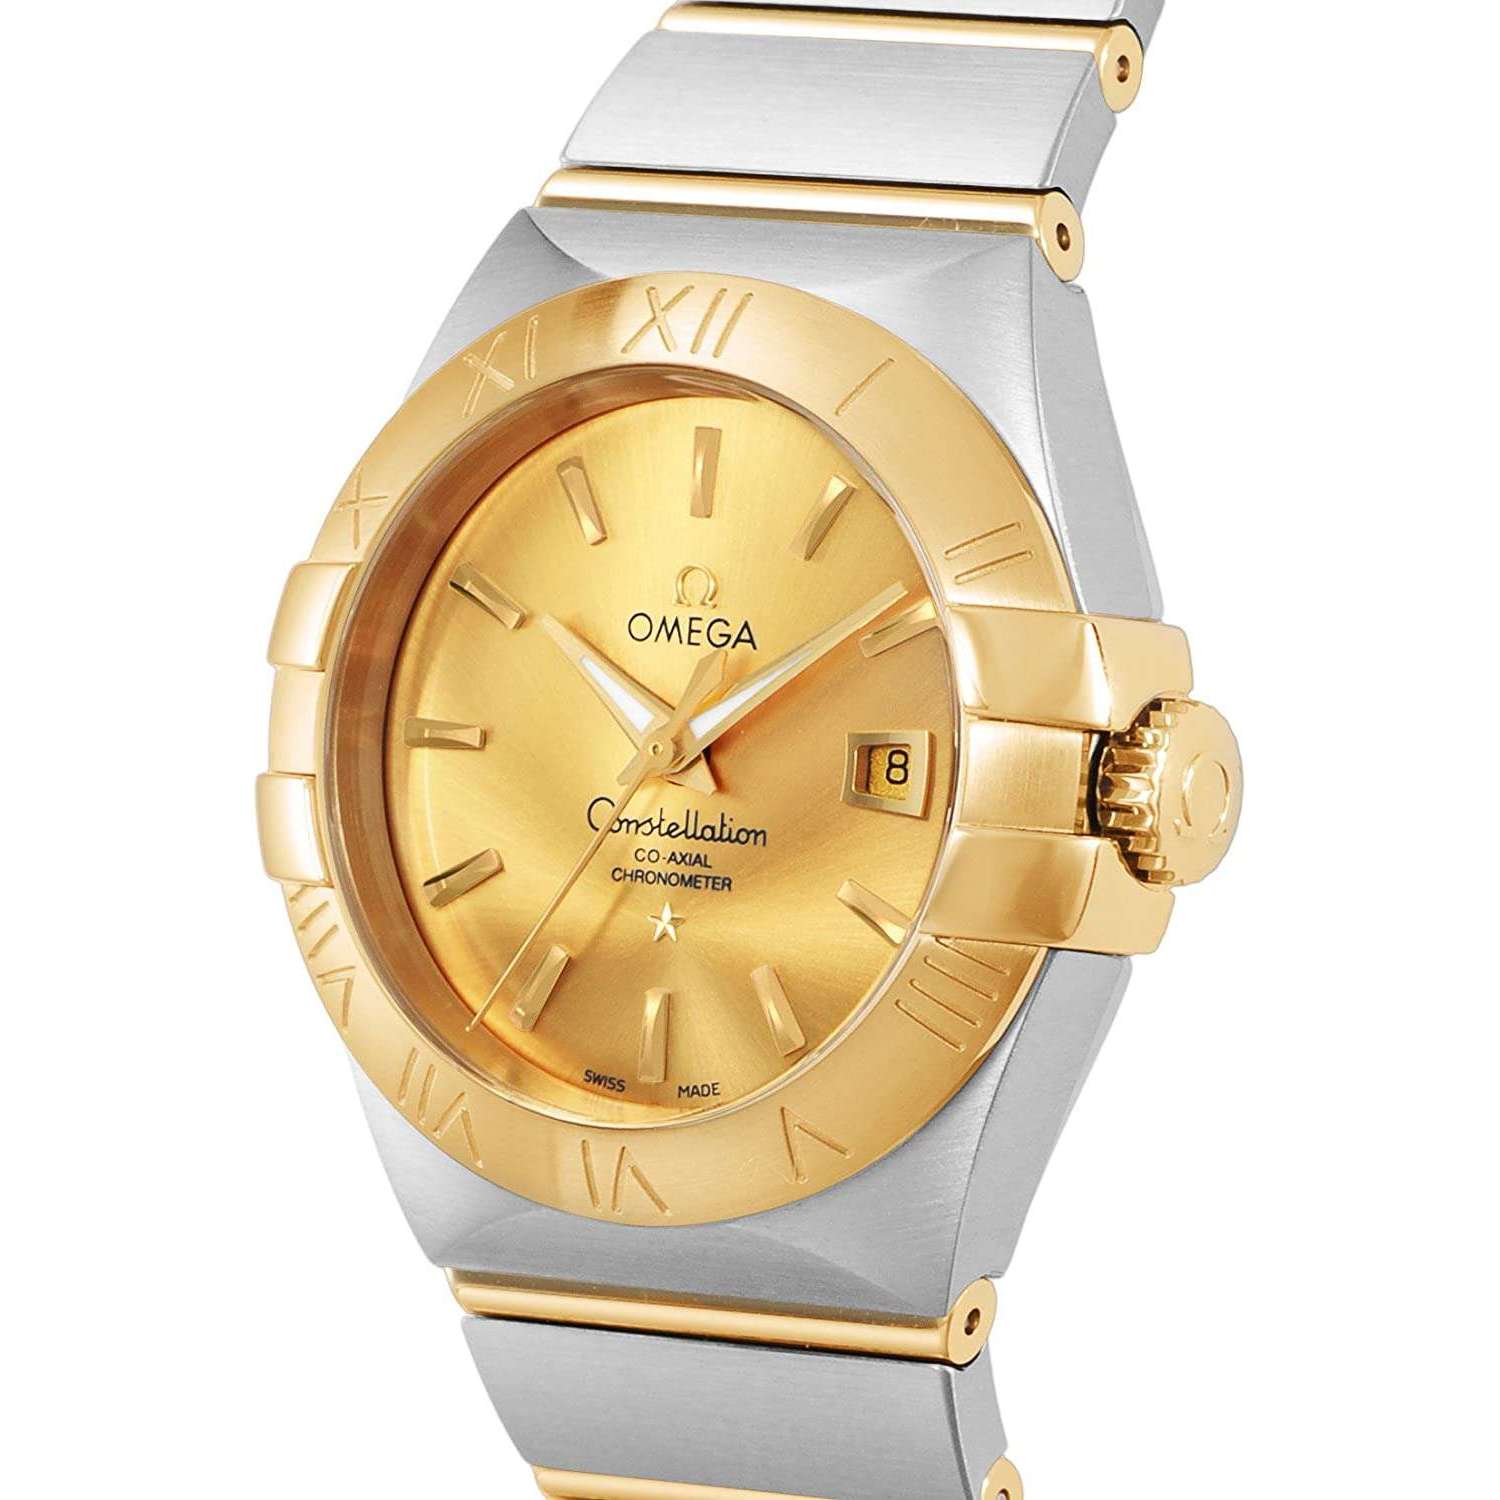 OMEGA CONSTELLATION CO‑AXIAL CHRONOMETER 31 MM MEN WATCH 123.20.31.20.08.001 - ROOK JAPAN